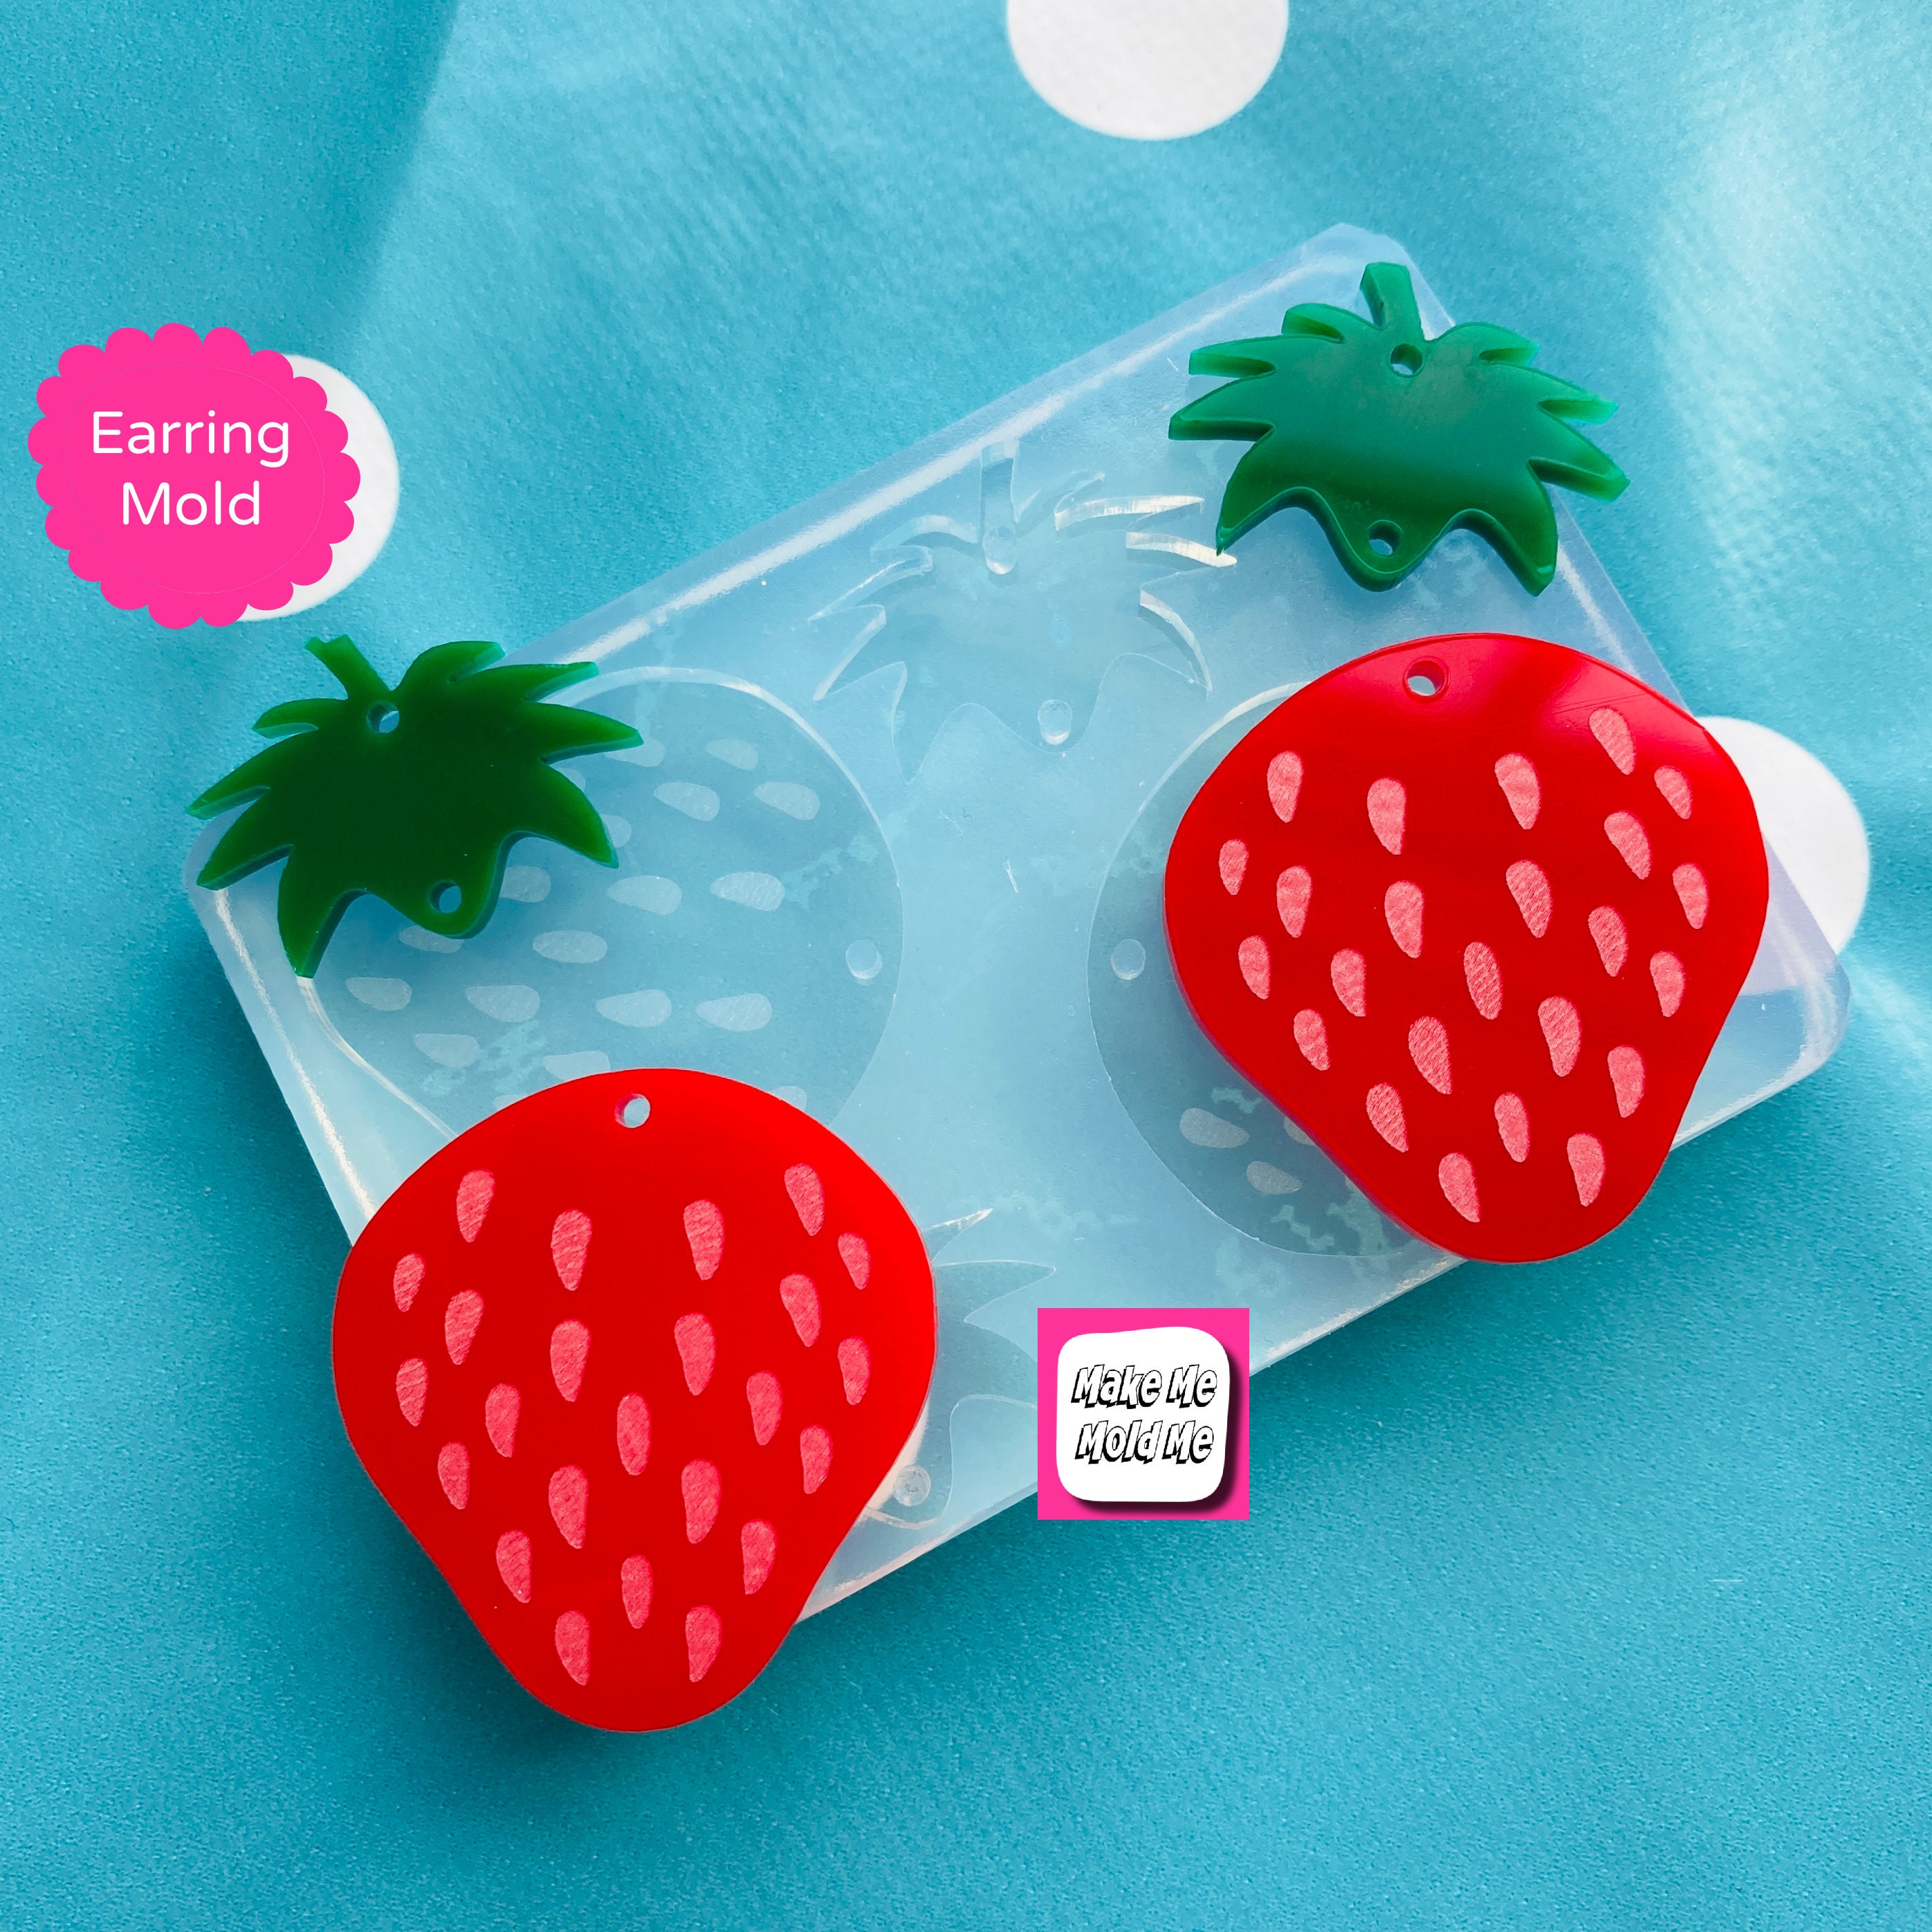 Strawberry 3d Silicone Mold. Embeds Strawberry Mold. Epoxy Resin